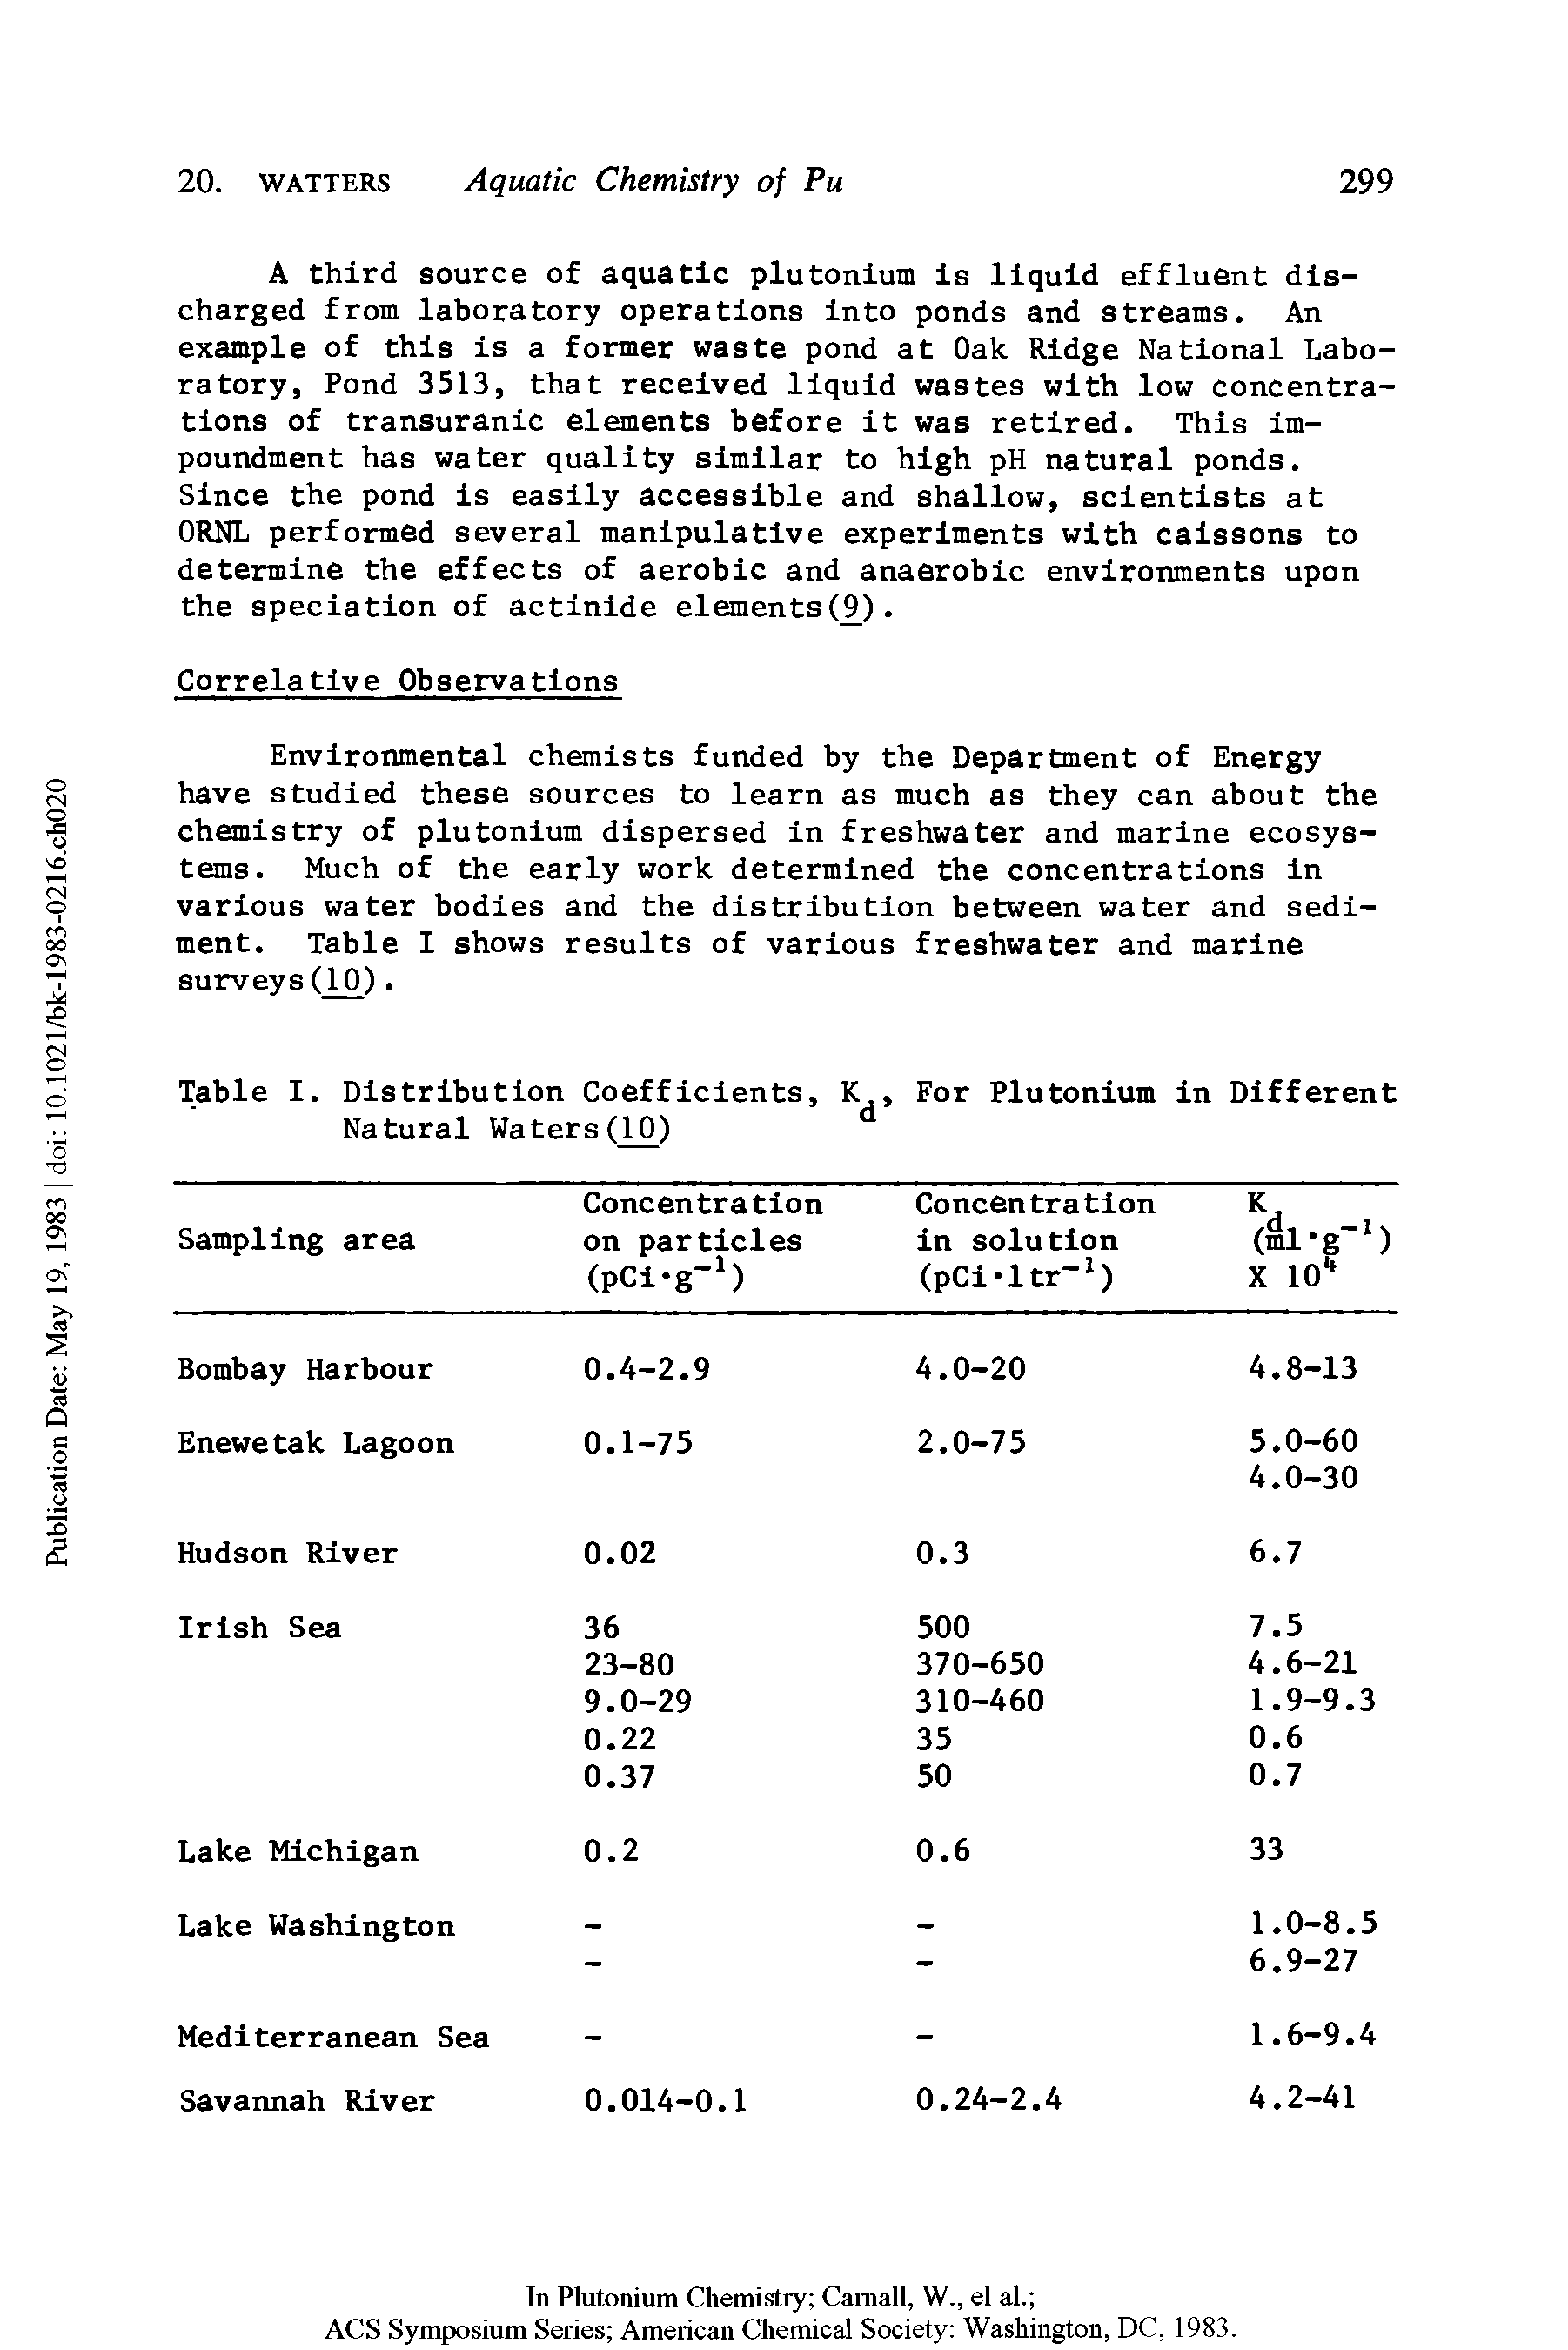 Table I. Distribution Coefficients, K, For Plutonium in Different Natural Waters(10)...